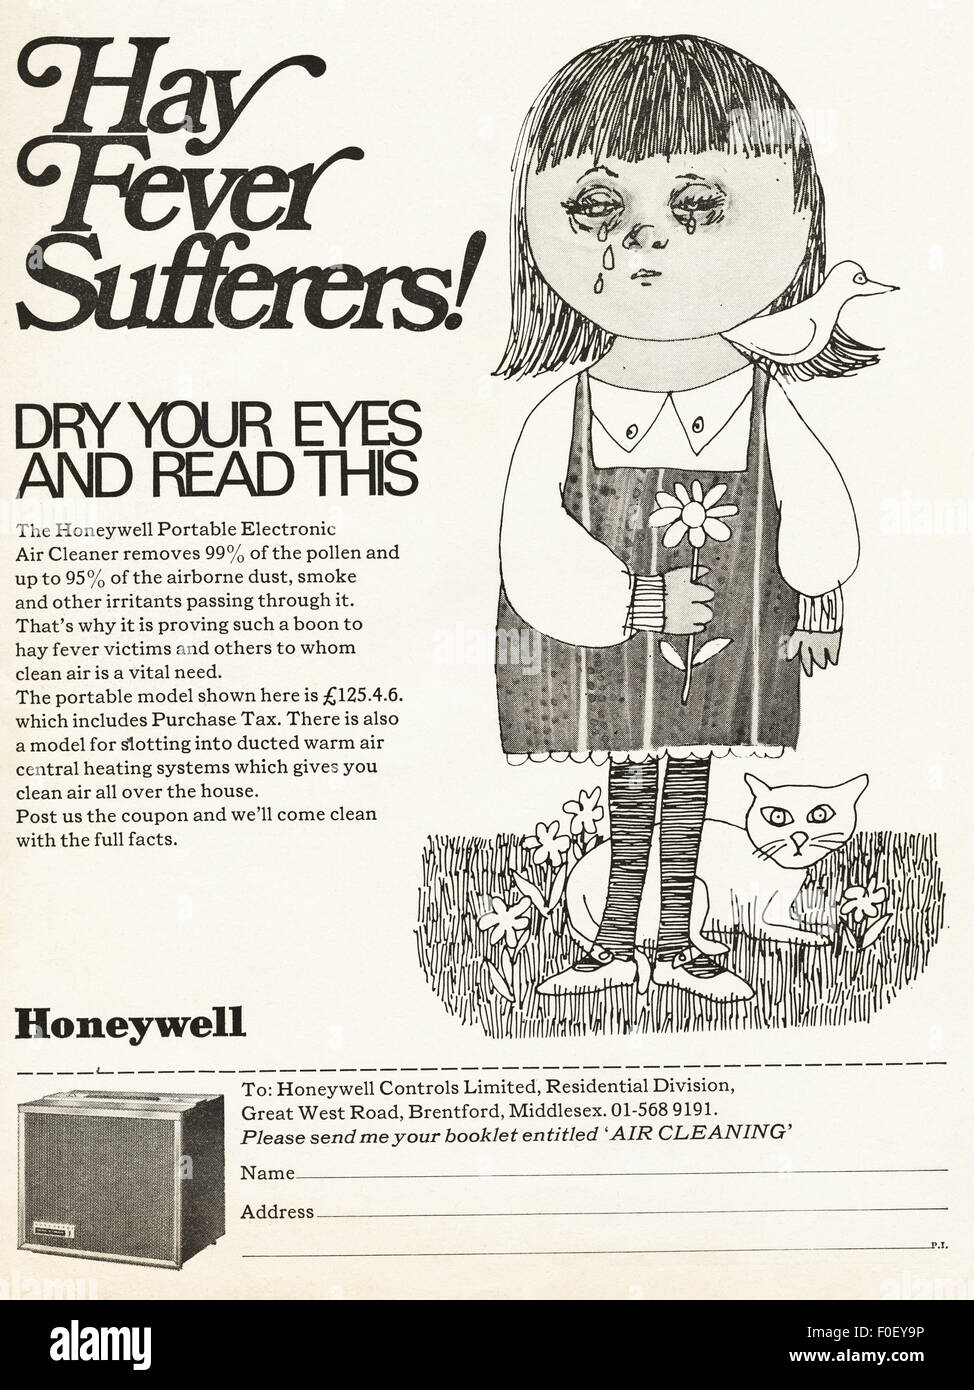 1960s advert. Magazine advertisement dated 1968 advertising Honeywell Portable Electronic Air Cleaner for hay fever sufferers. Stock Photo